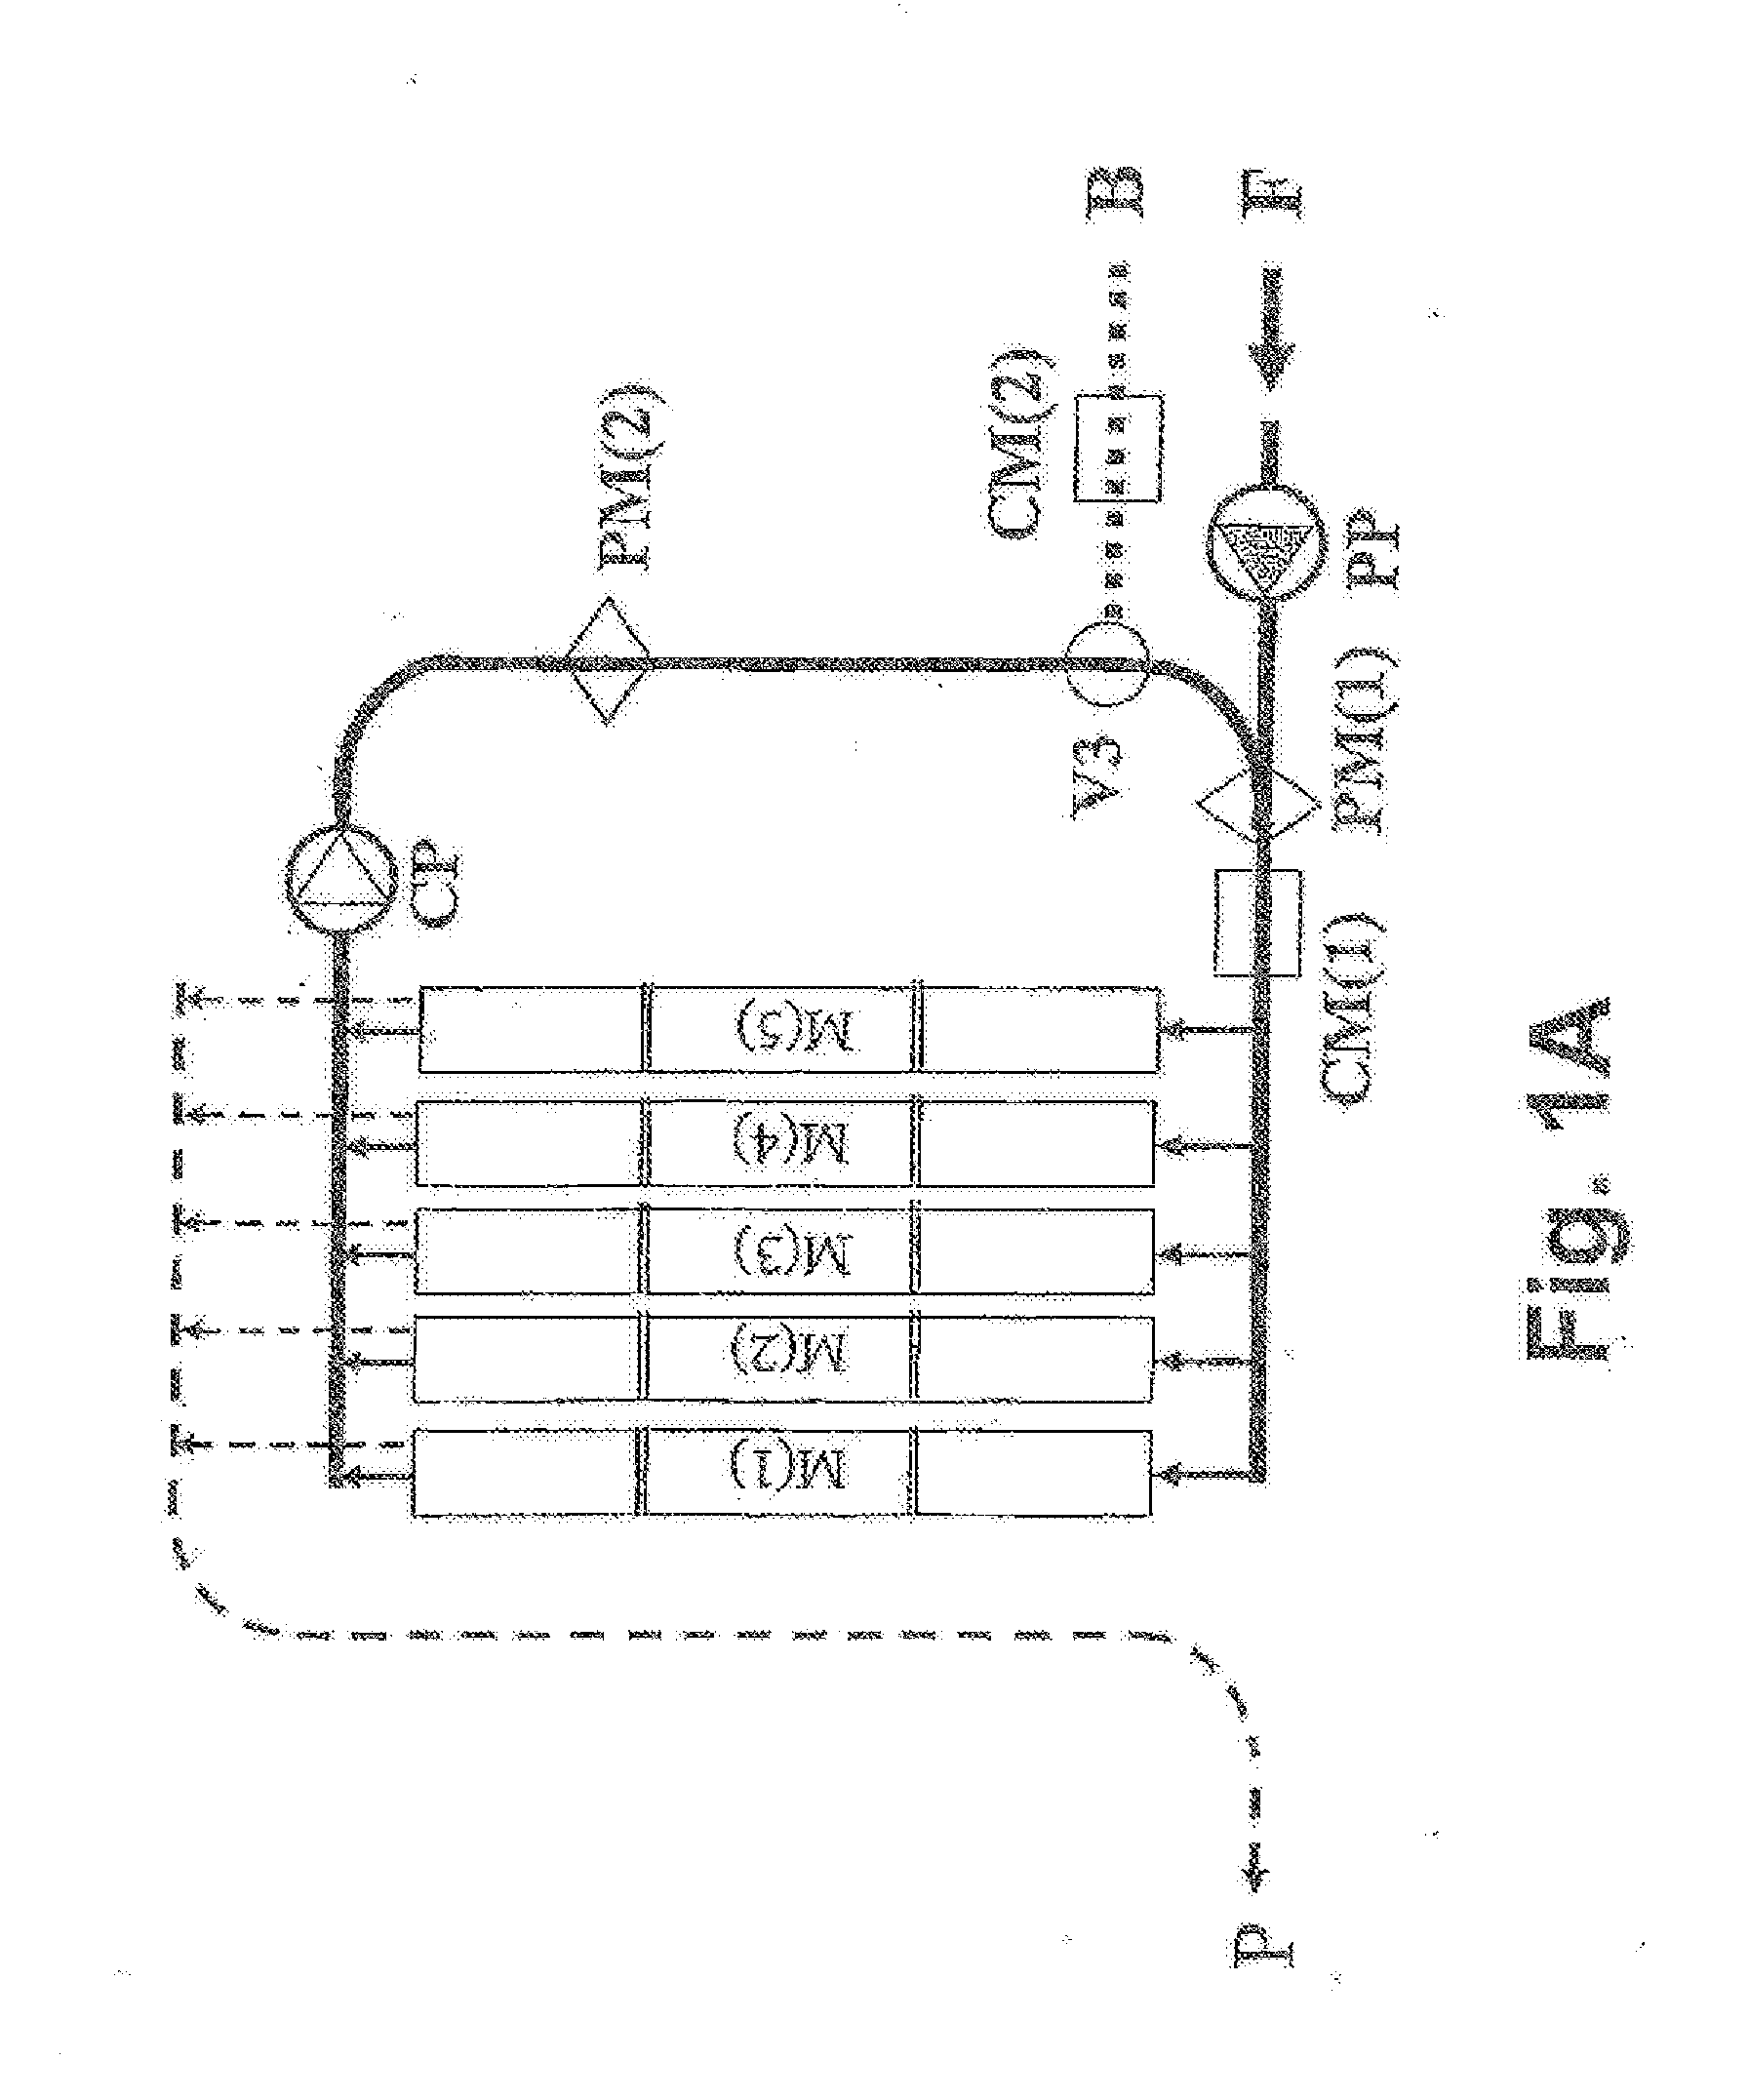 Continuous closed-circuit desalination apparatus without containers